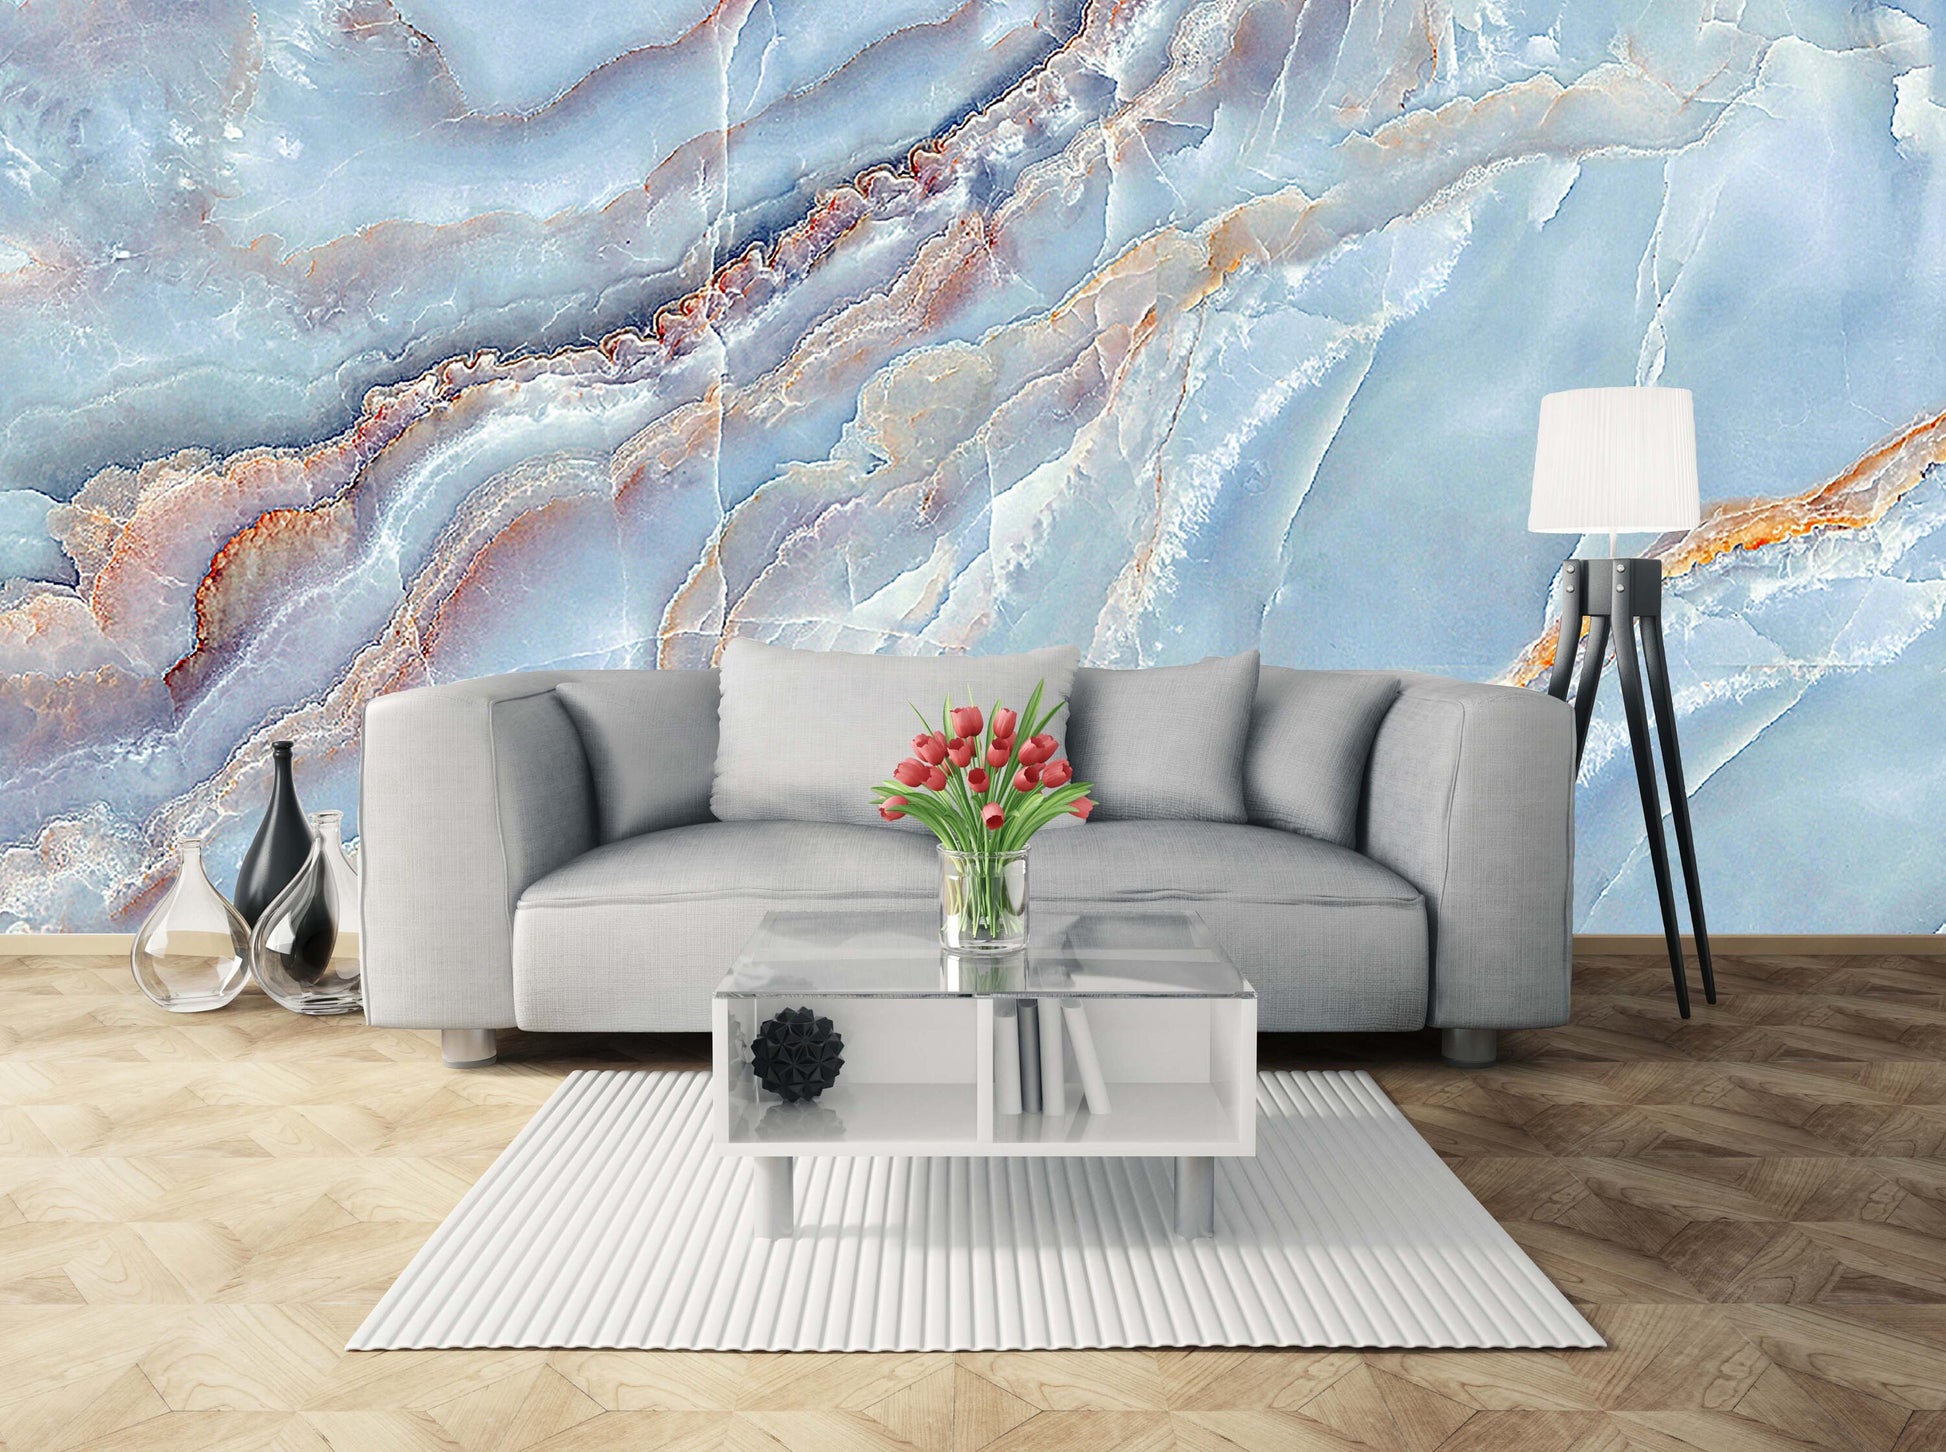 Marble mural Light blue peel and stick wallpaper Adhesive wall murals Wall prints Home wall decor Room decor aesthetic teen girls